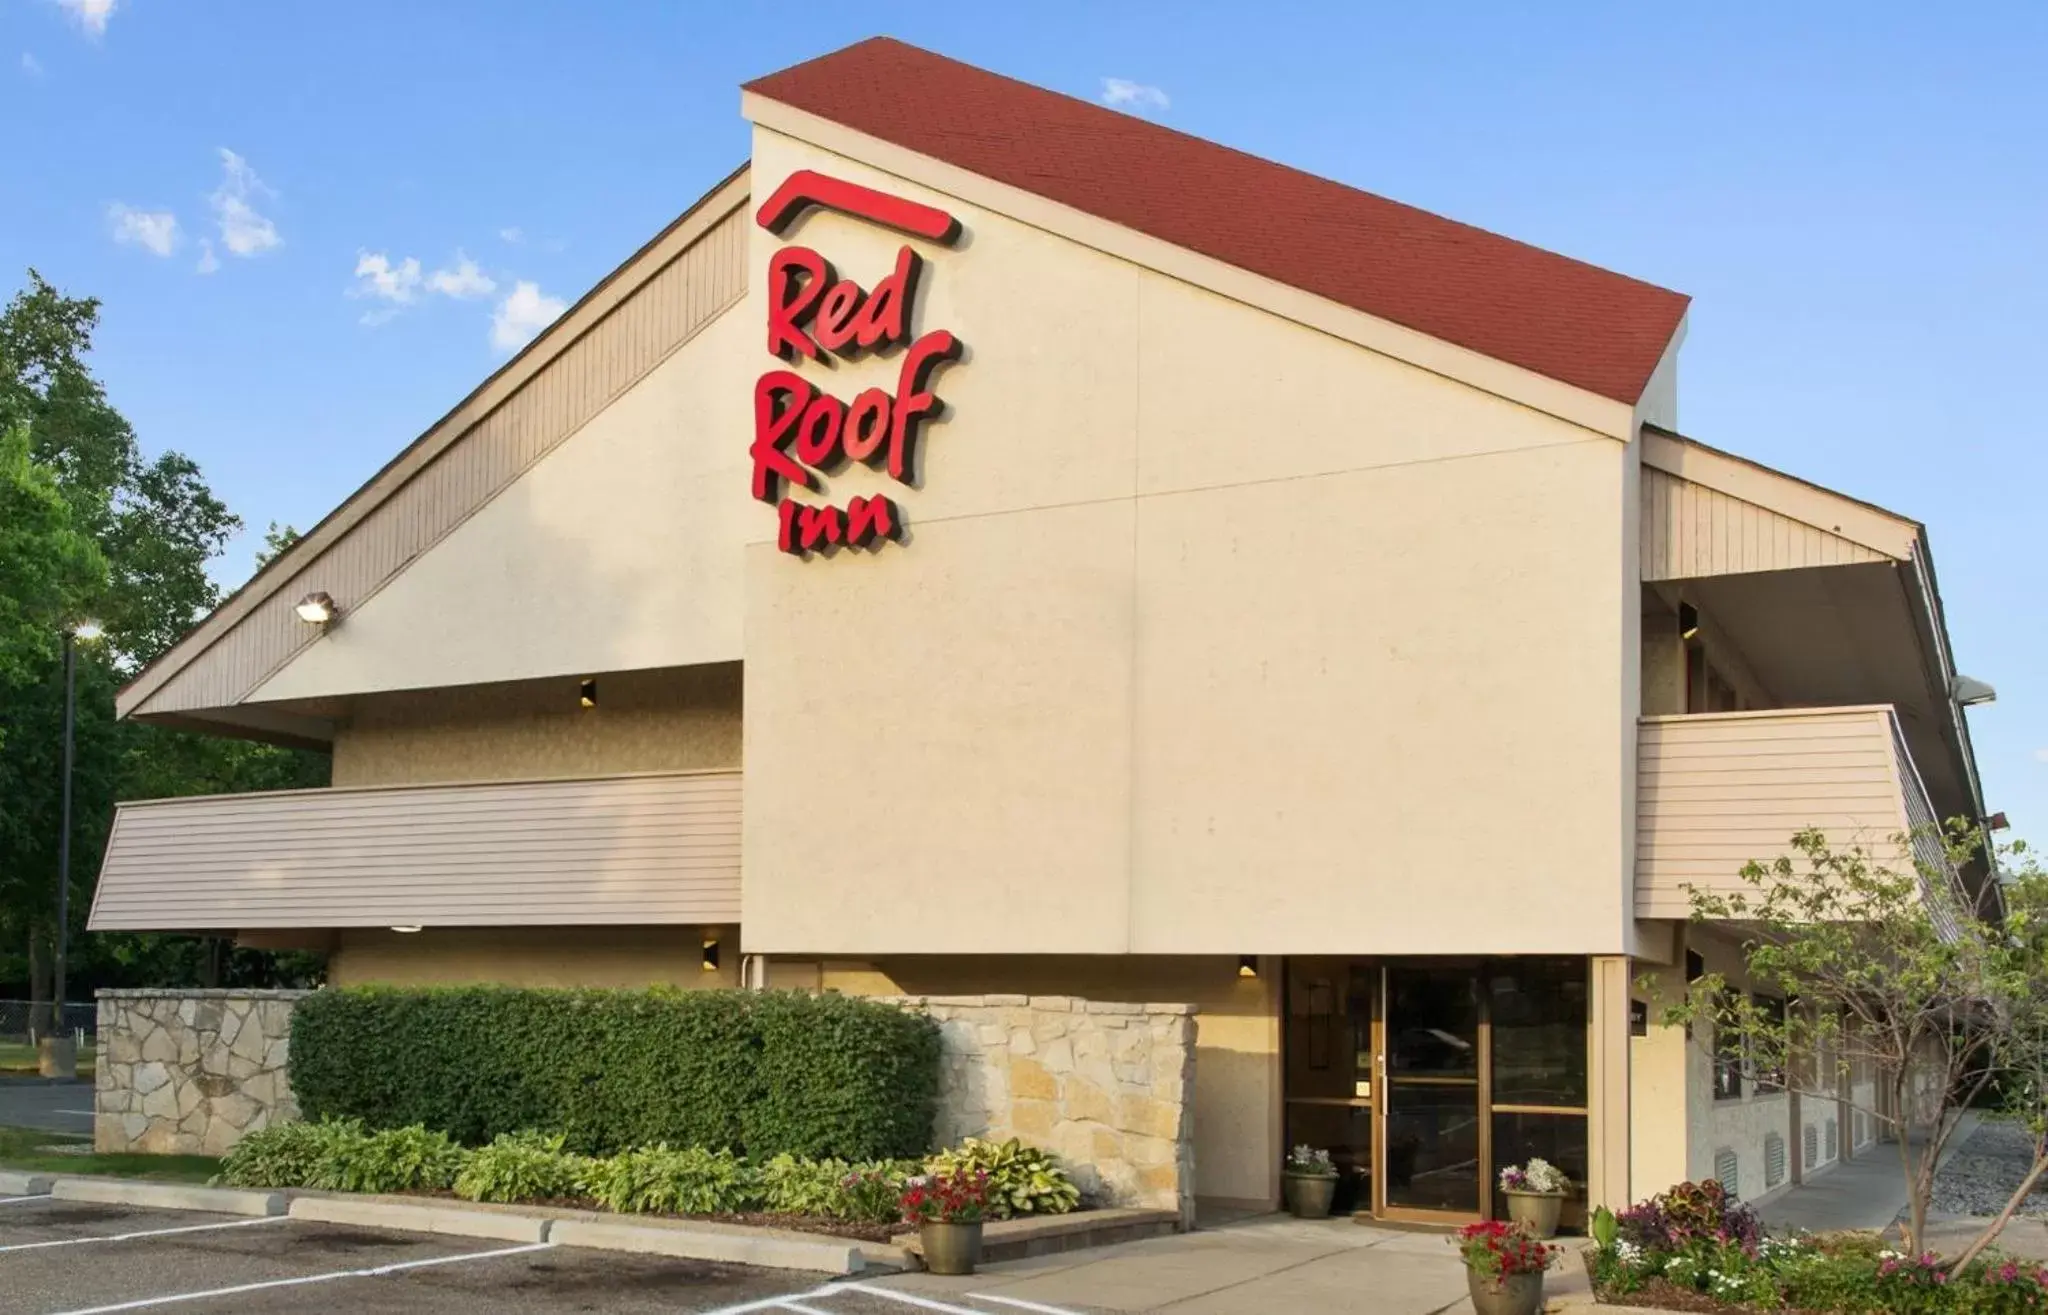 Property Building in Red Roof Inn Detroit - Roseville St Clair Shores